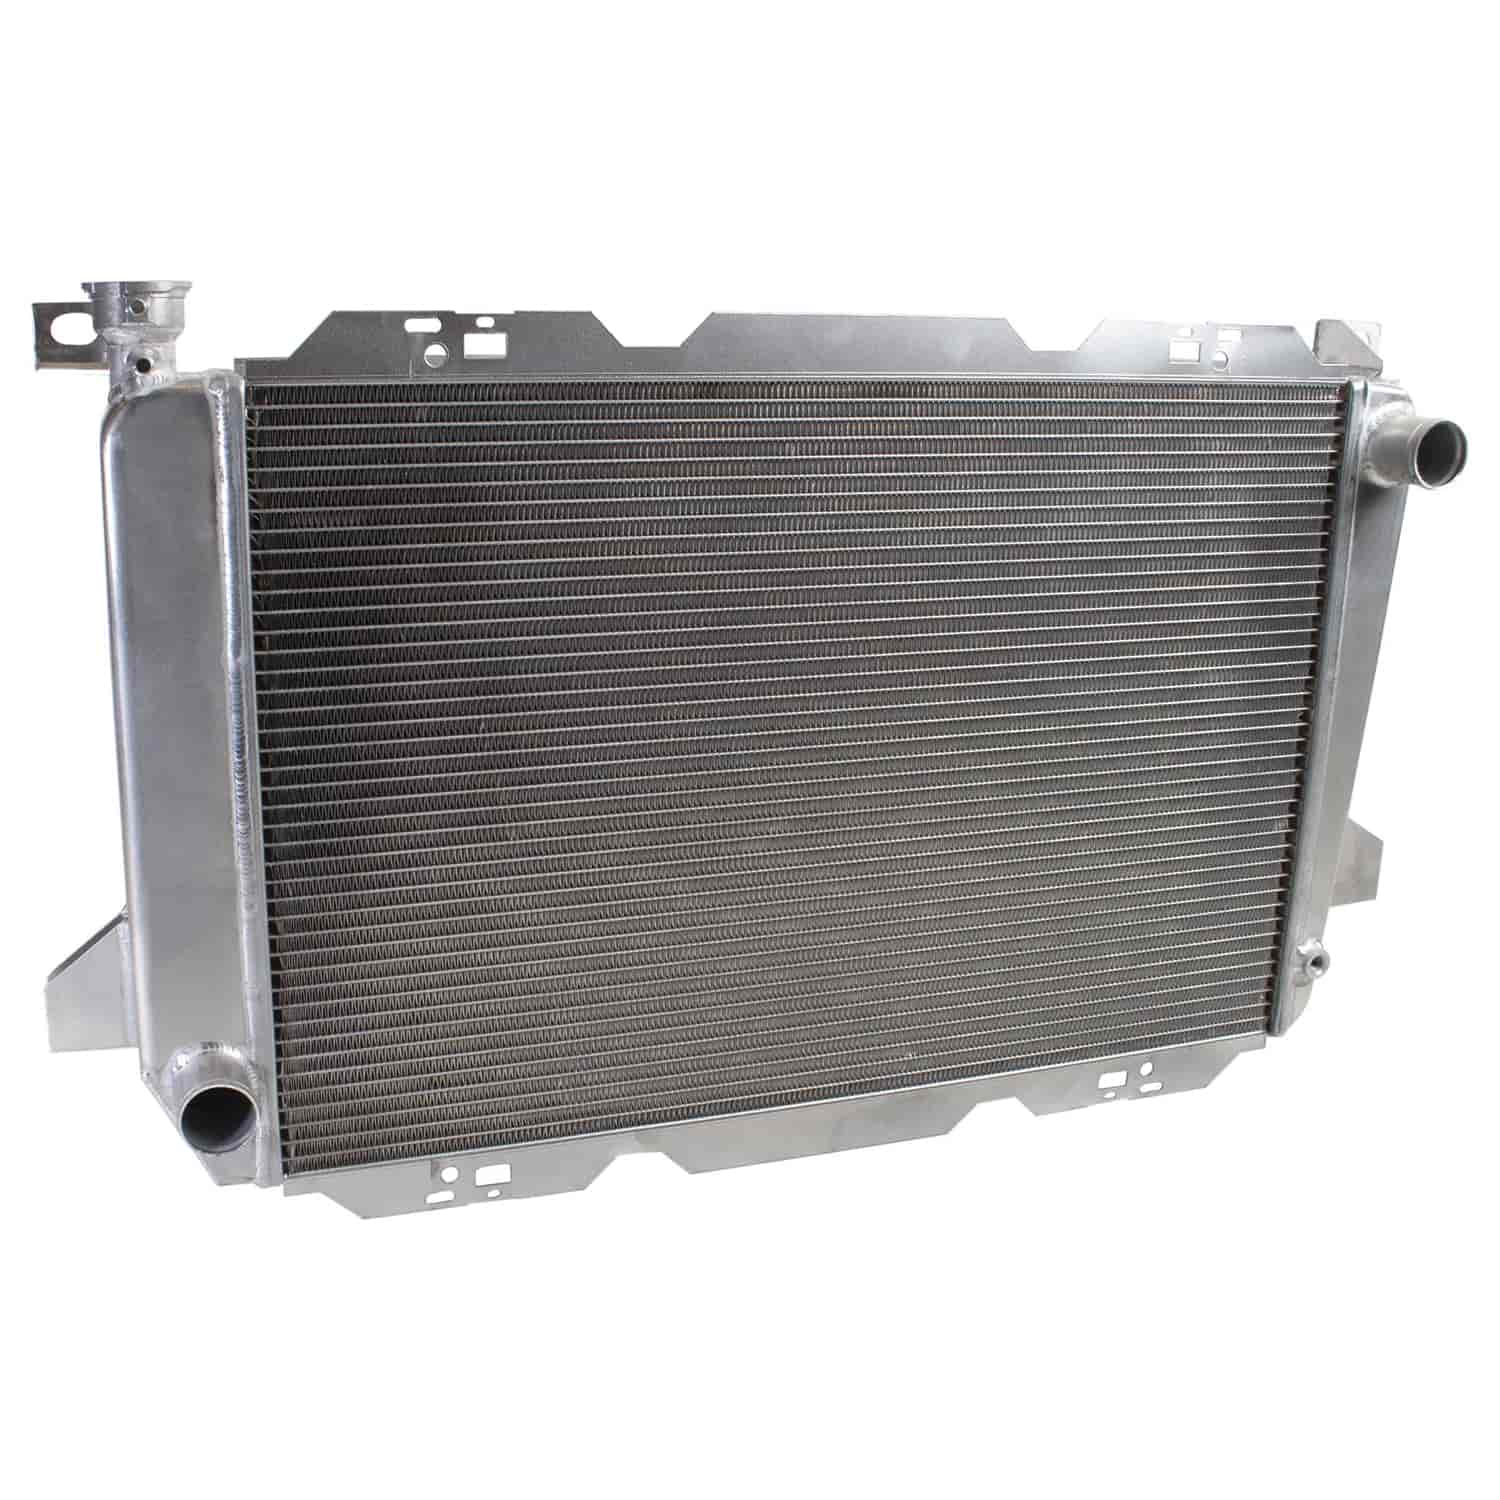 ExactFit Radiator for 1985-1987 Ford Truck & 1985-1996 Bronco